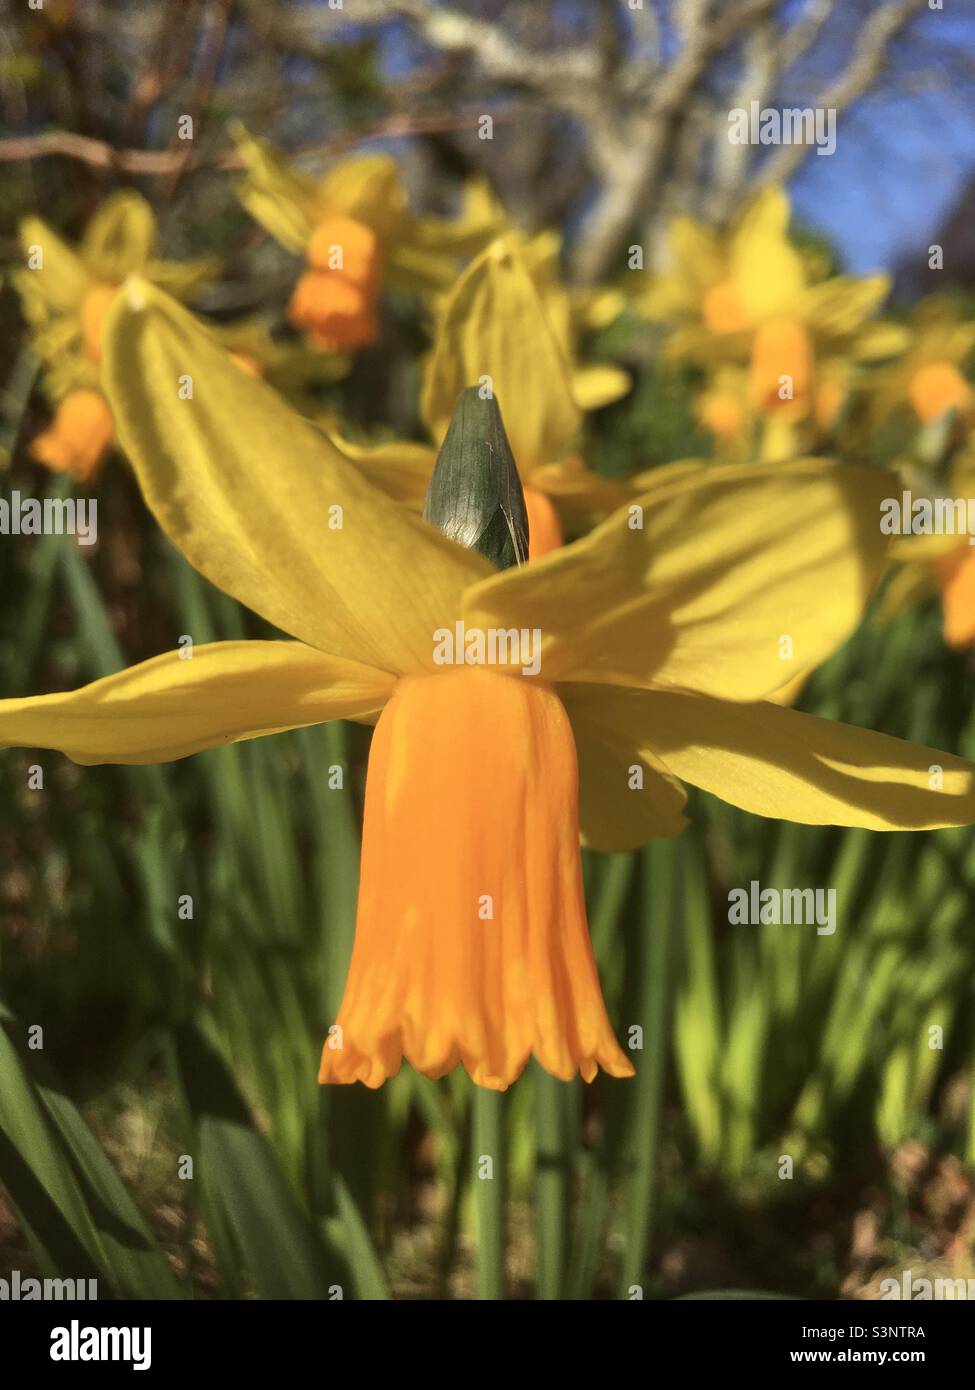 Daffodils, yellow, golden, green, sky, blue sky, trees, field, spring, nature, beauty Stock Photo